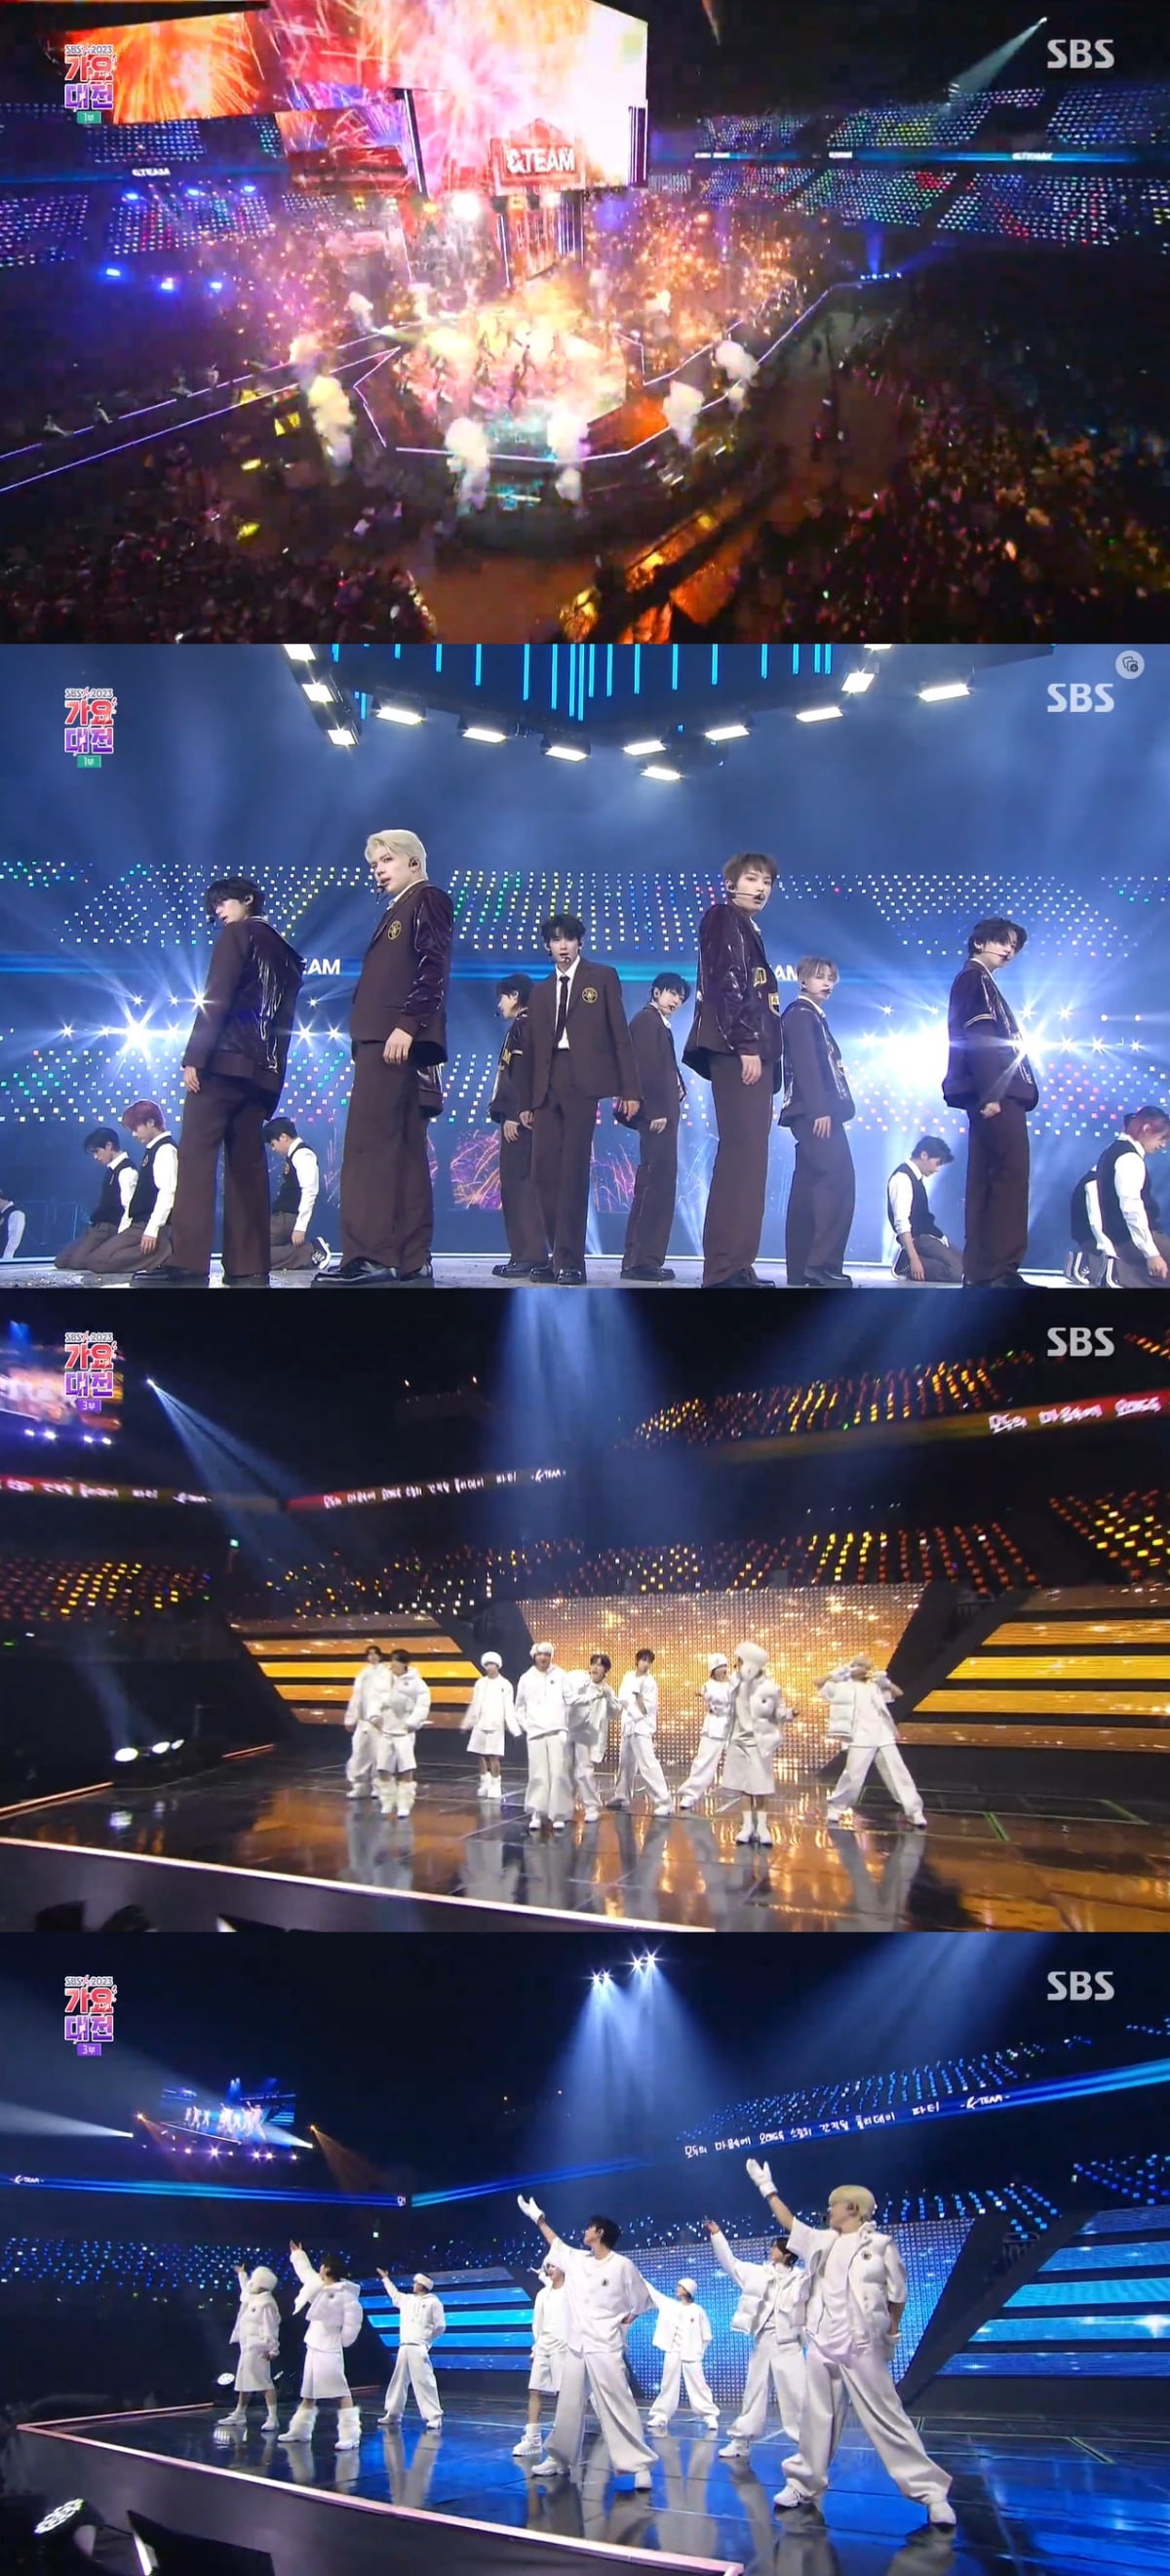 &TEAM, first appearance on SBS ‘Gayo Daejeon’